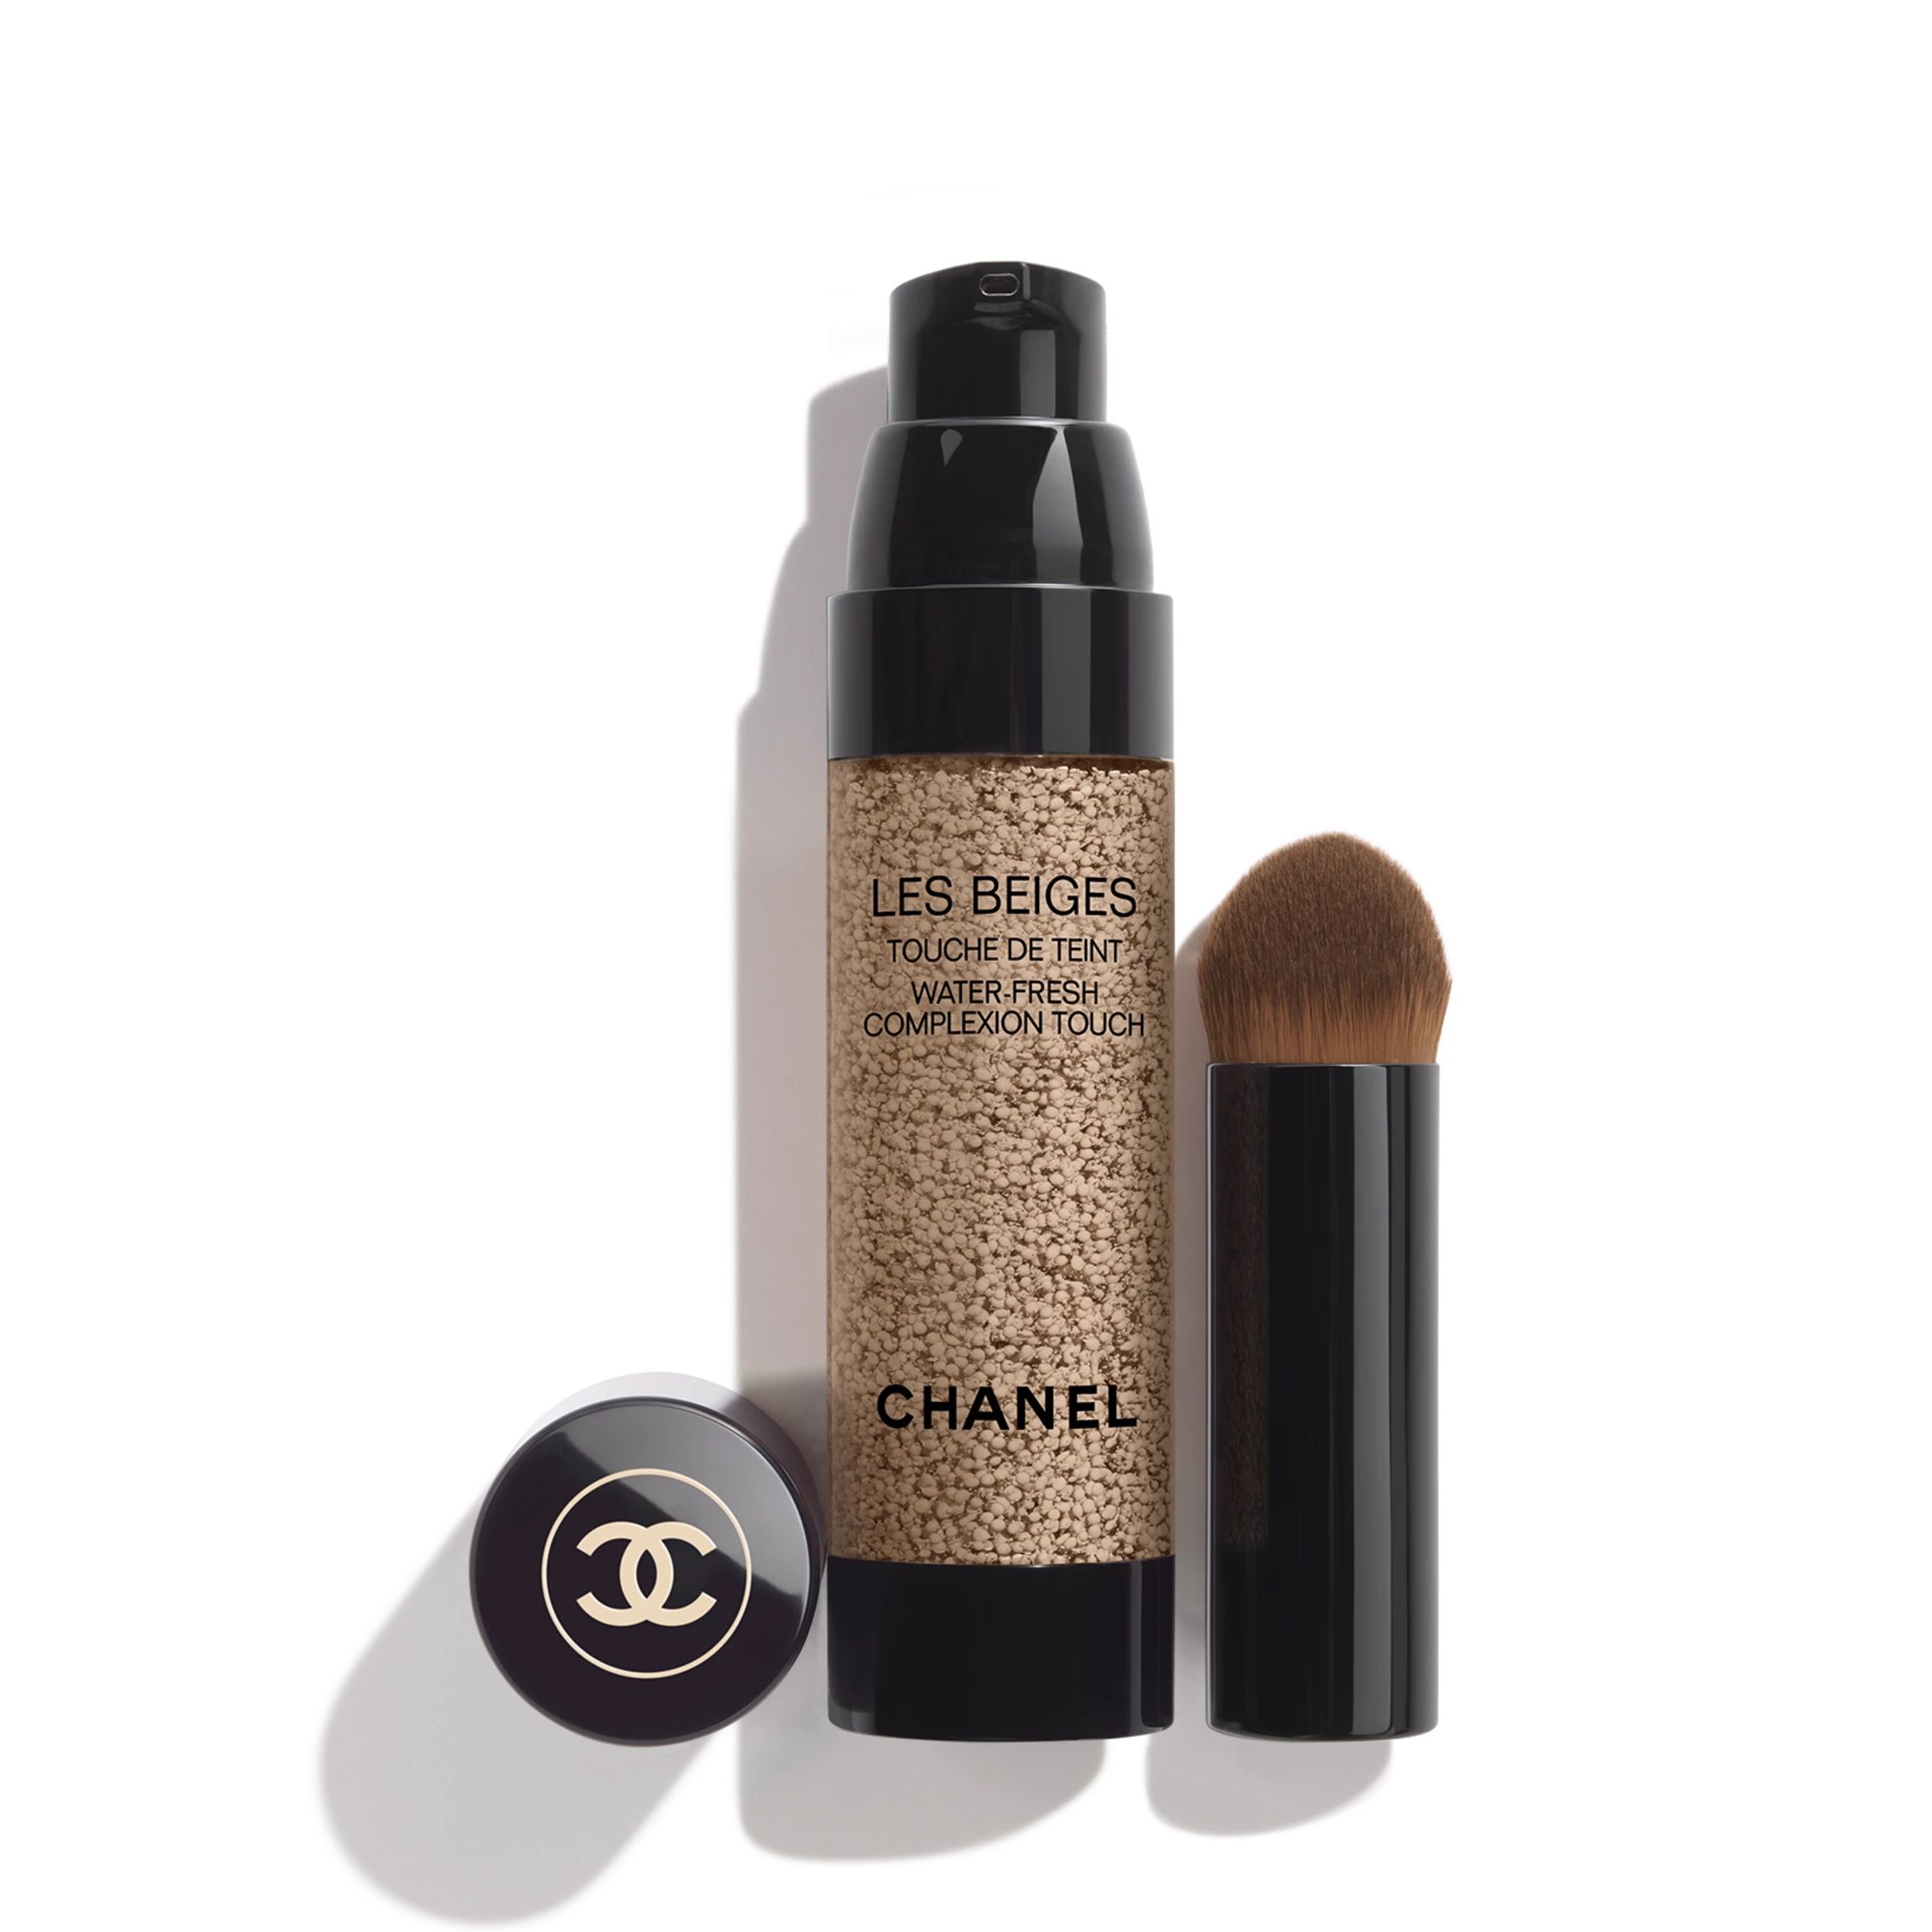 LES BEIGES Water-fresh complexion touch B10 | CHANEL | Chanel, Inc. (US)